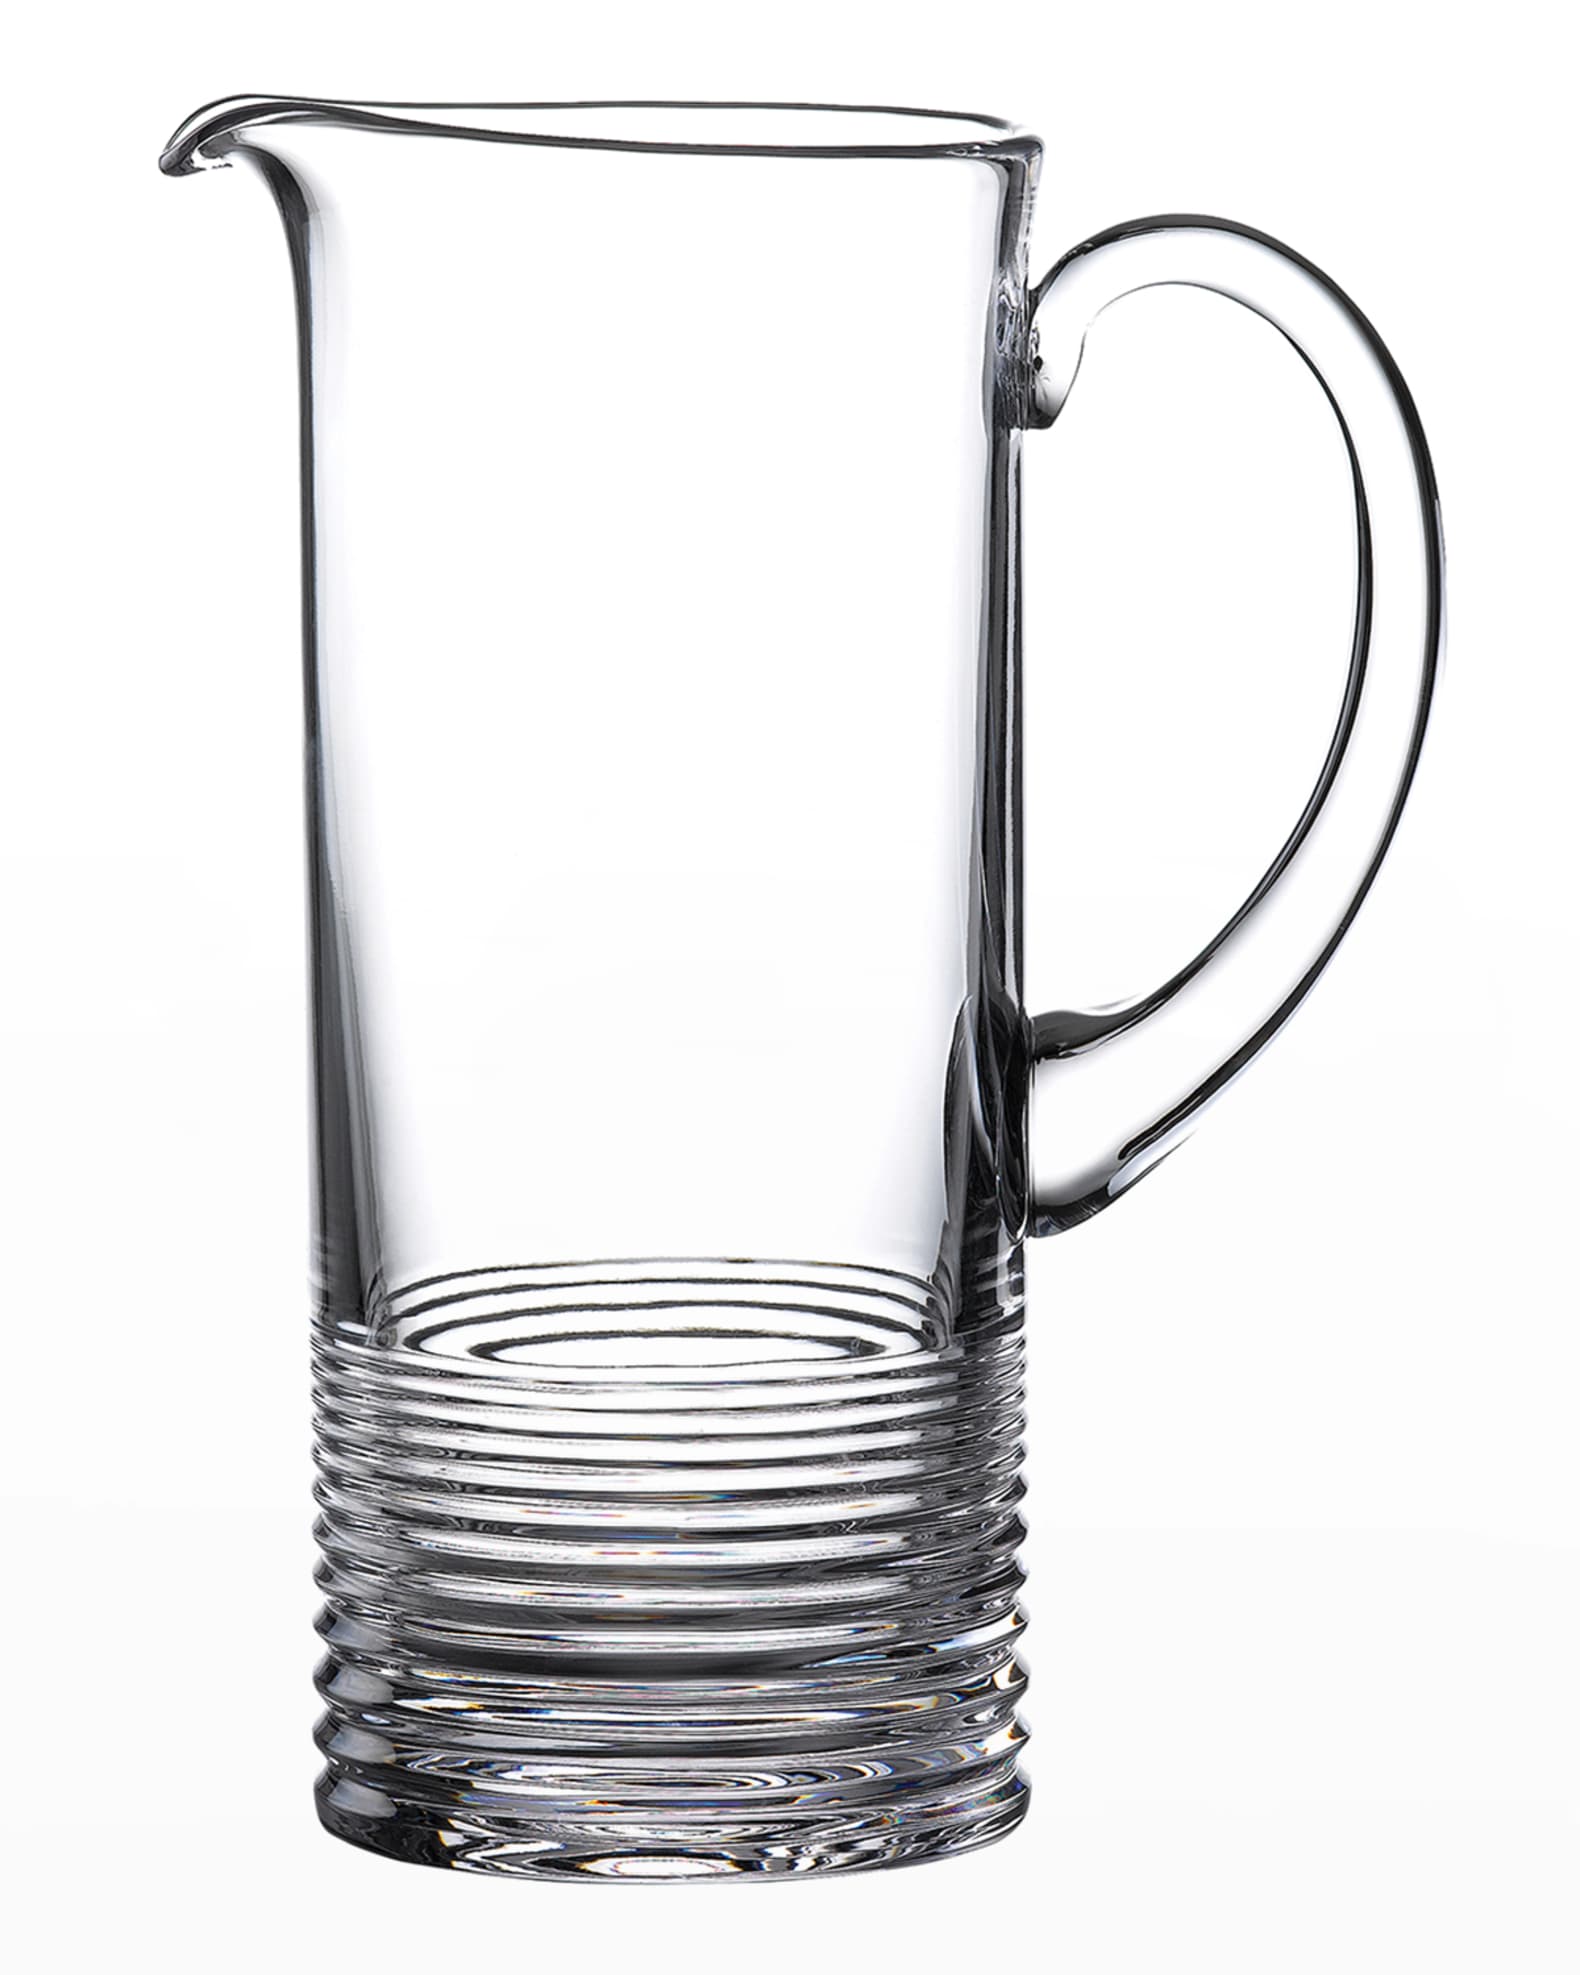 Waterford Crystal Circon Pitcher